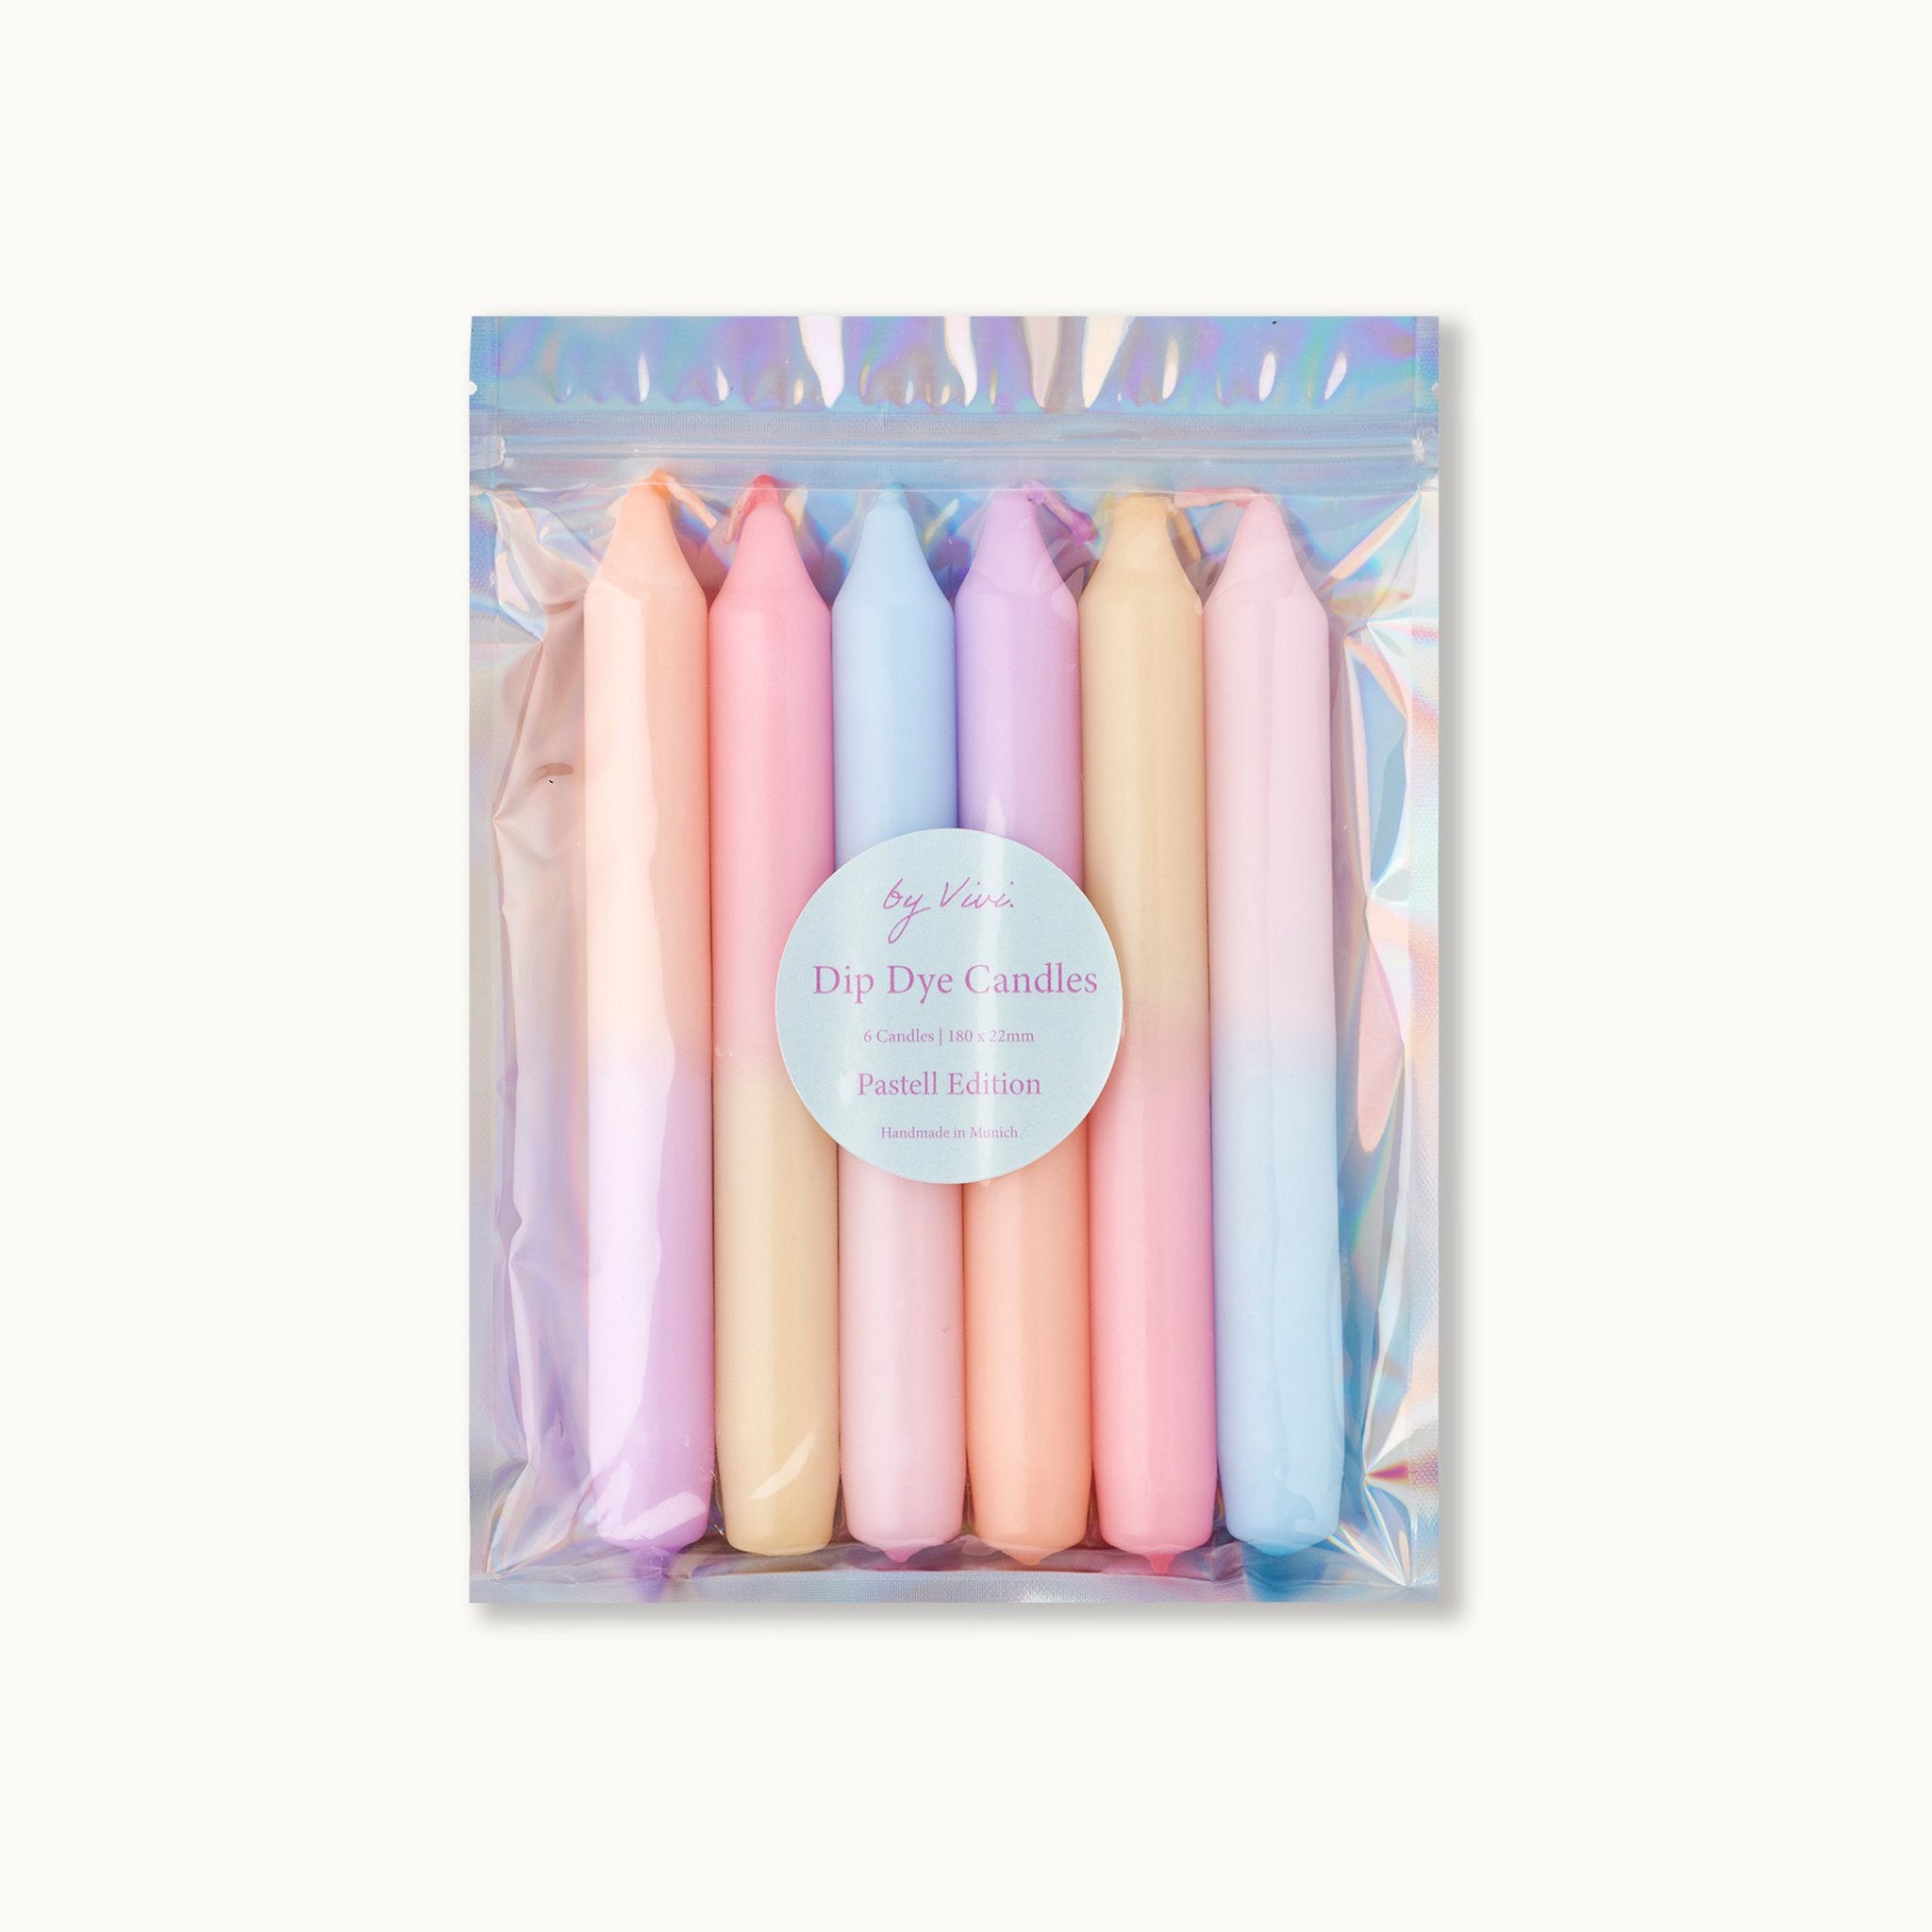 Dip dye candles in a set: Pastel Edition